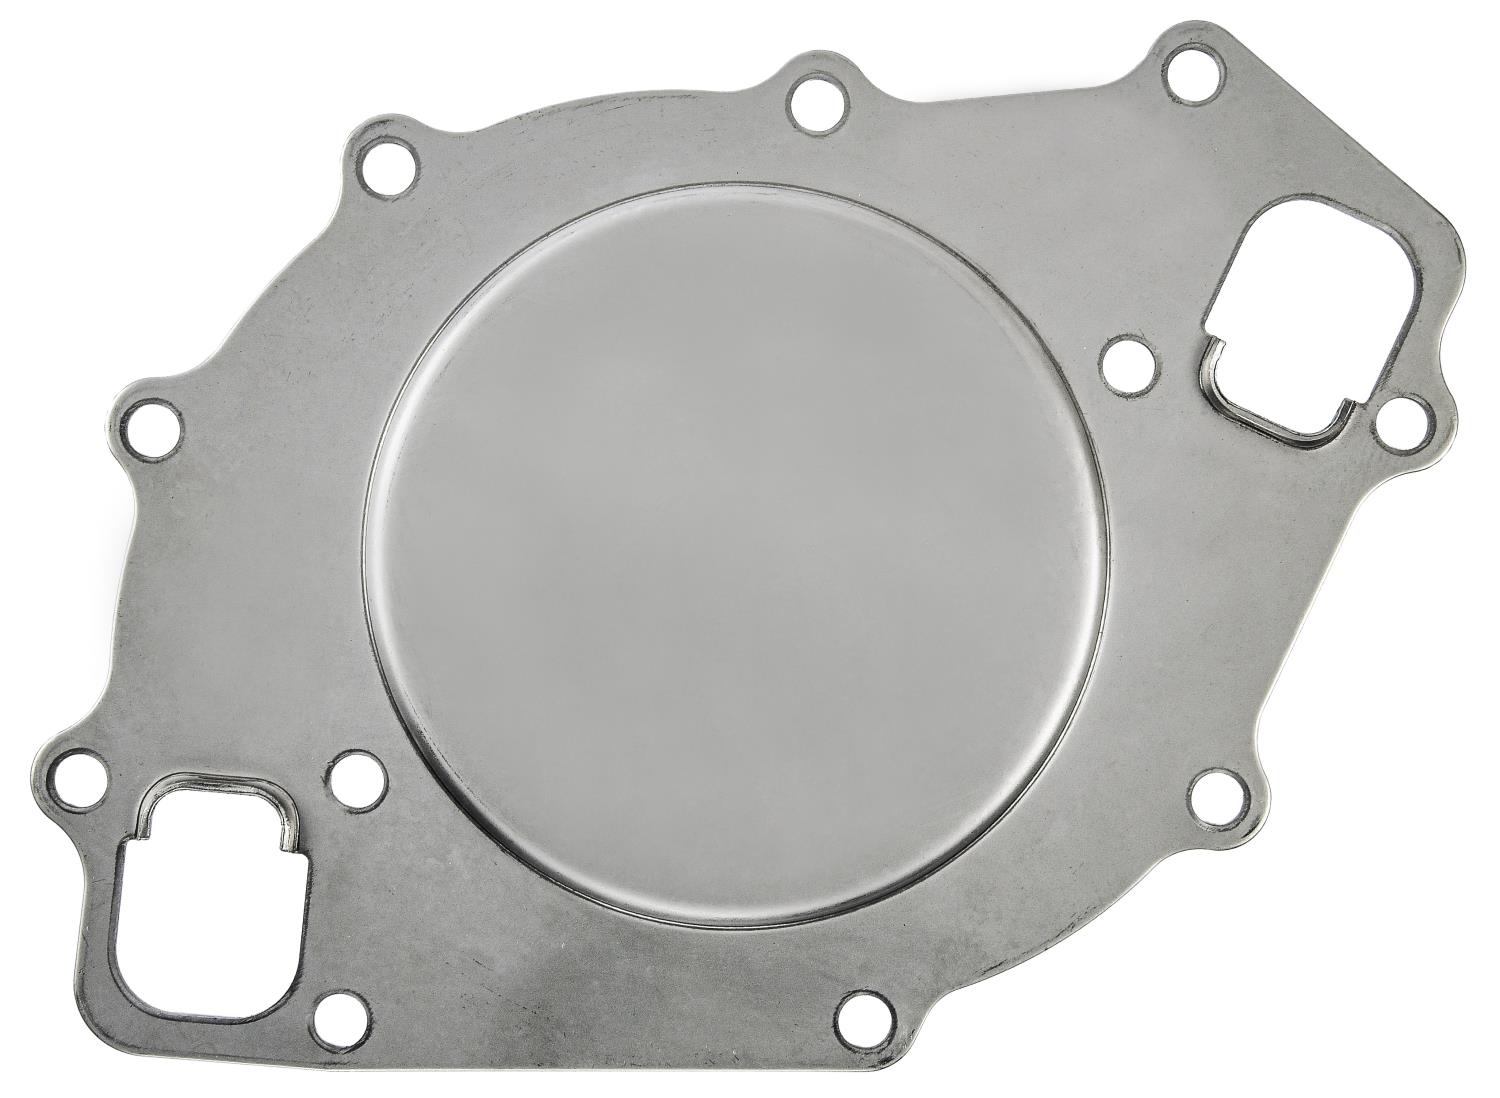 Stainless Steel Water Pump Backing Plate for 429, 460 ci Big Block Ford